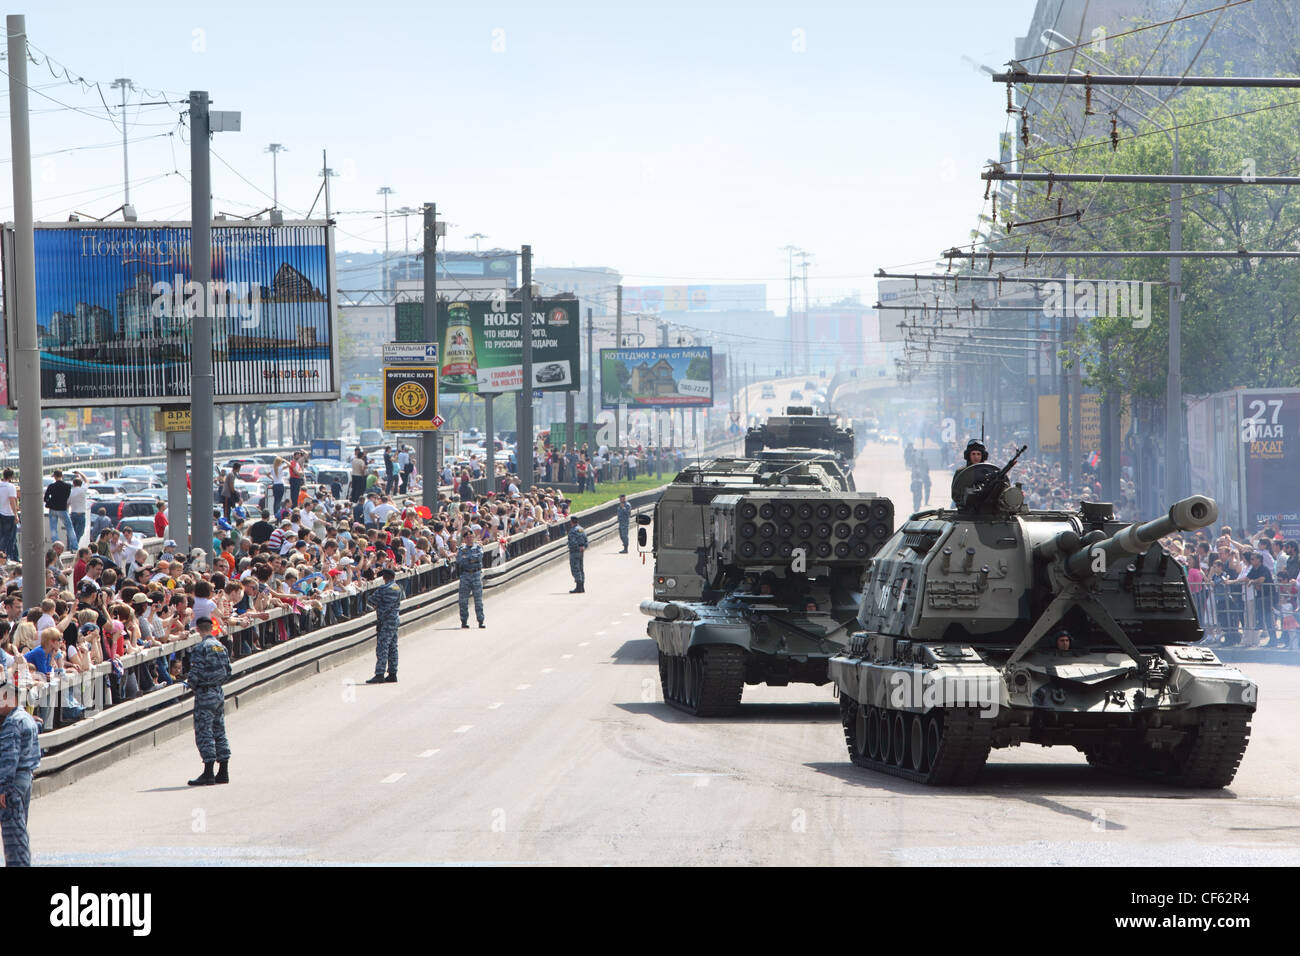 MOSCOW MAY 9 People looks weaponry tank road parade honor Great Patriotic War victory May 9 2010 Moscow Russia 160 military Stock Photo